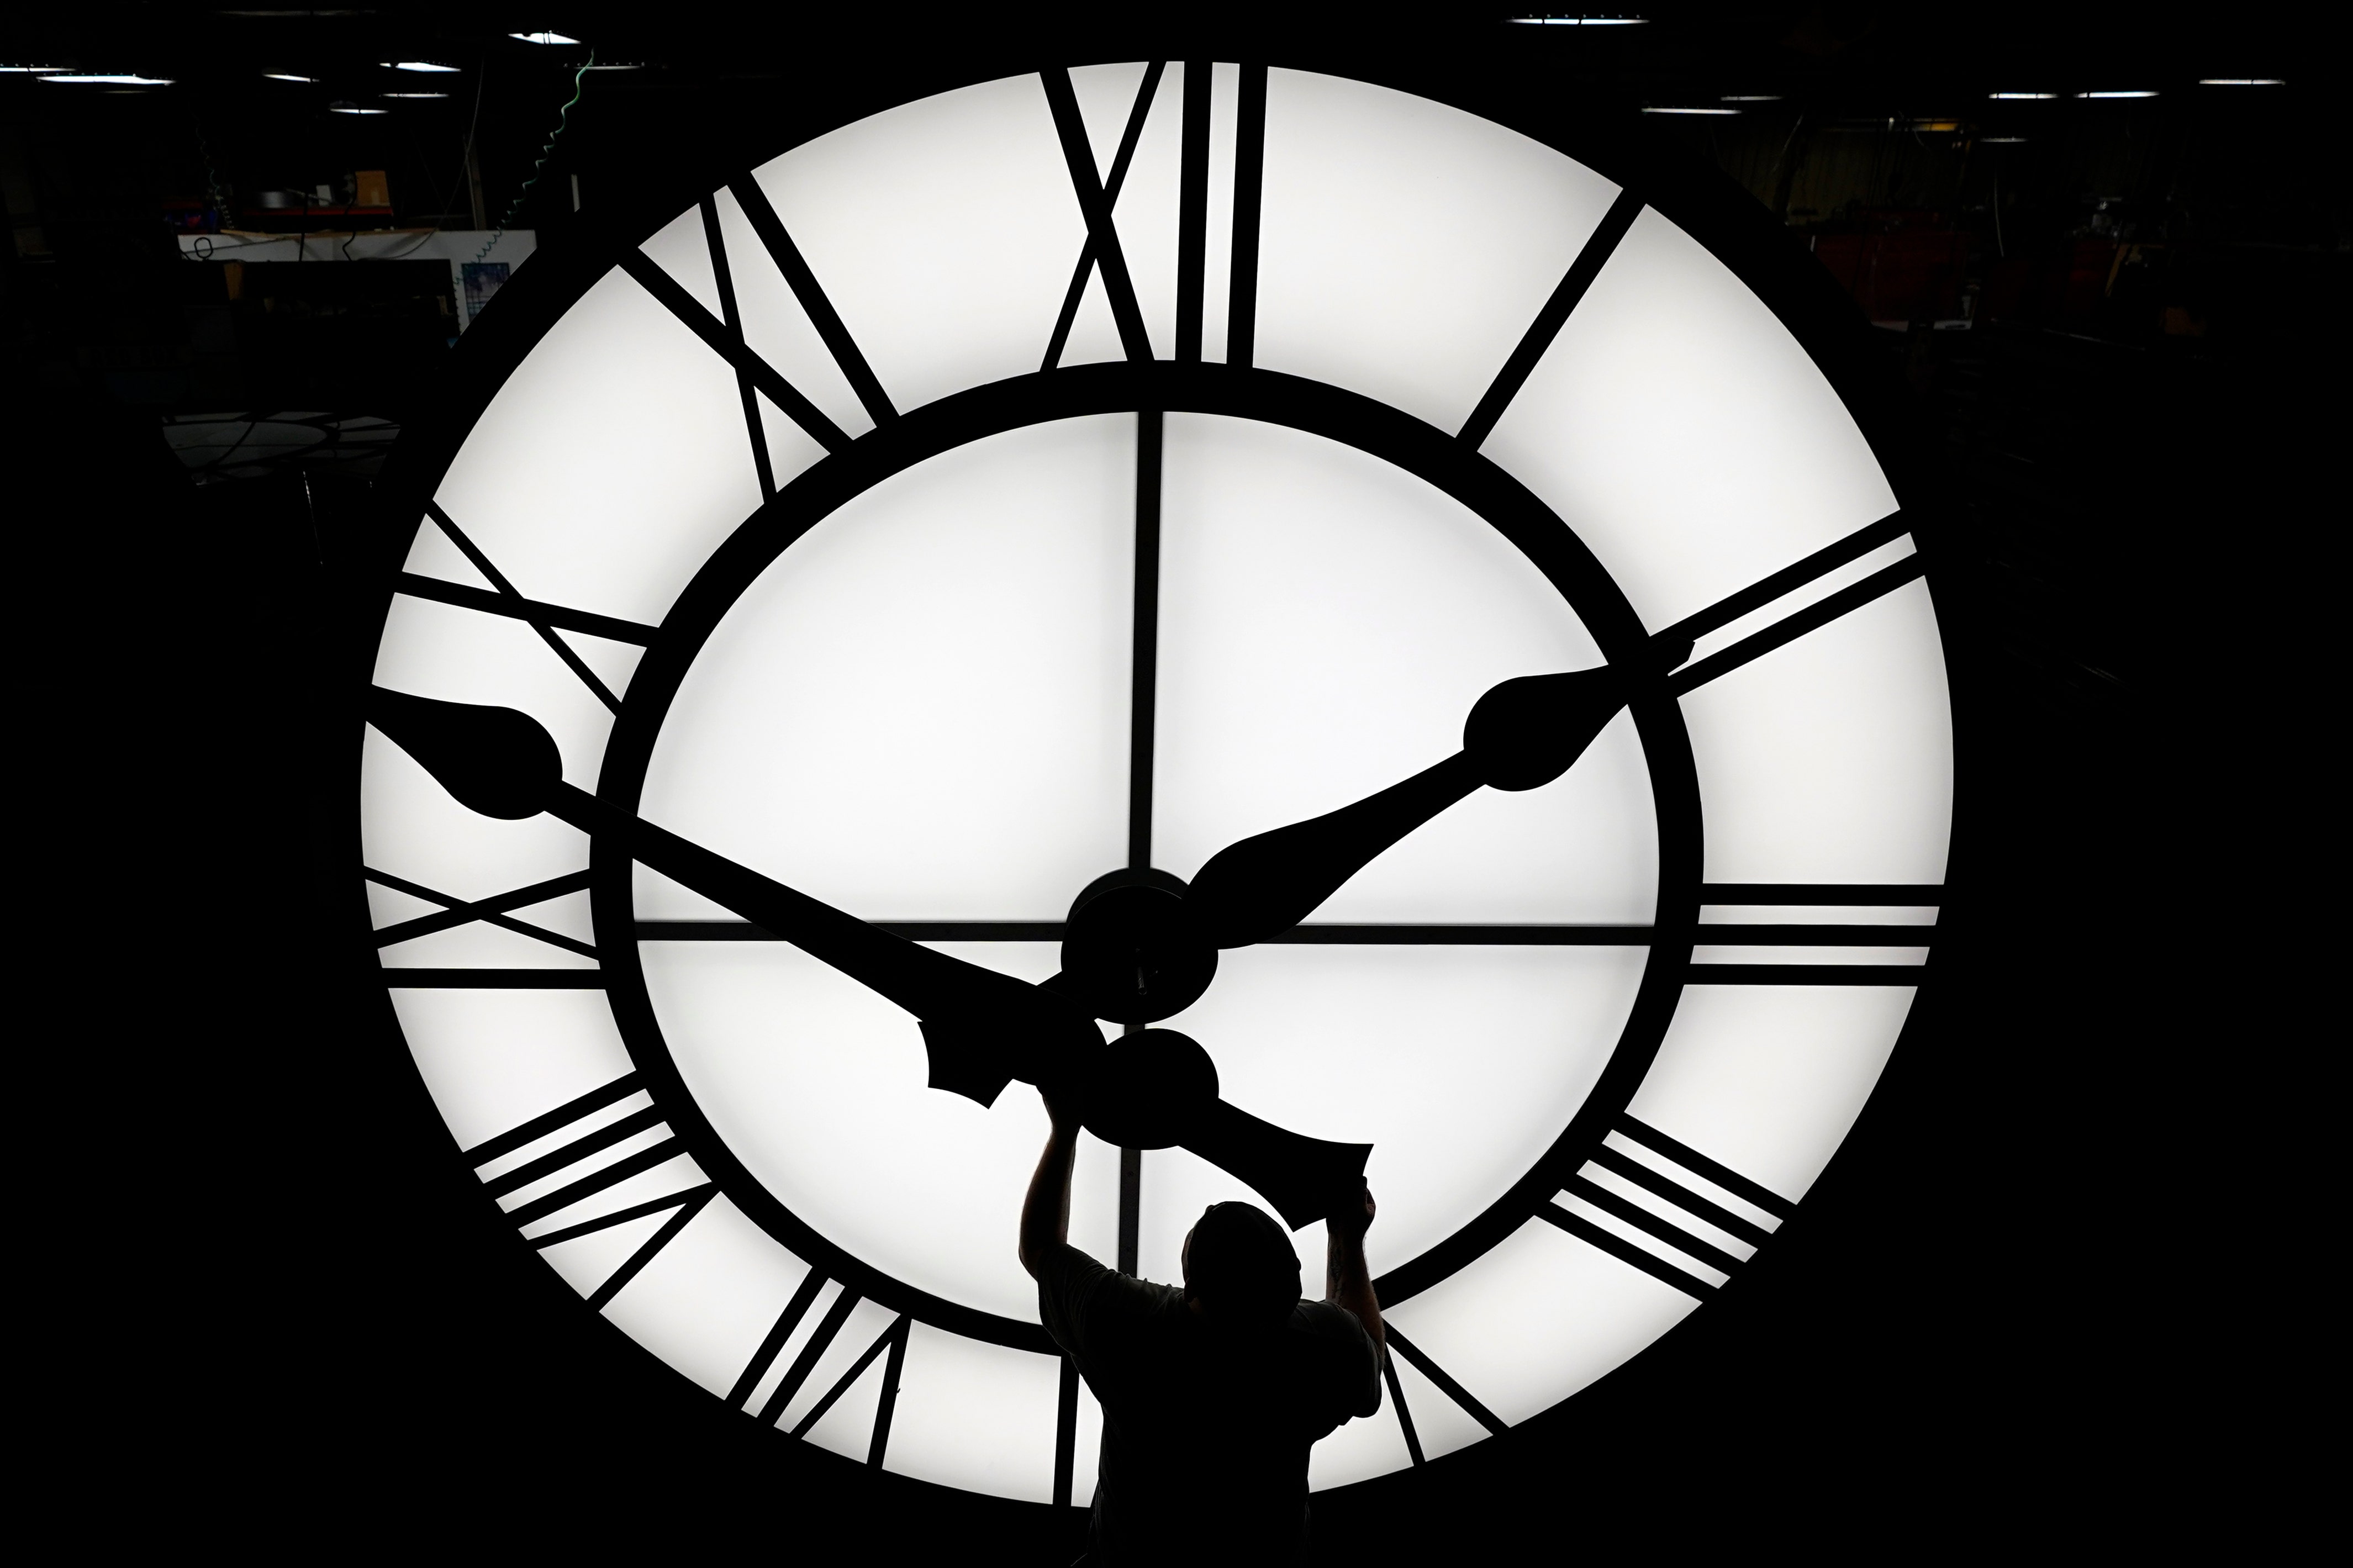 What is daylight saving time and why doesn’t most of Arizona observe it?